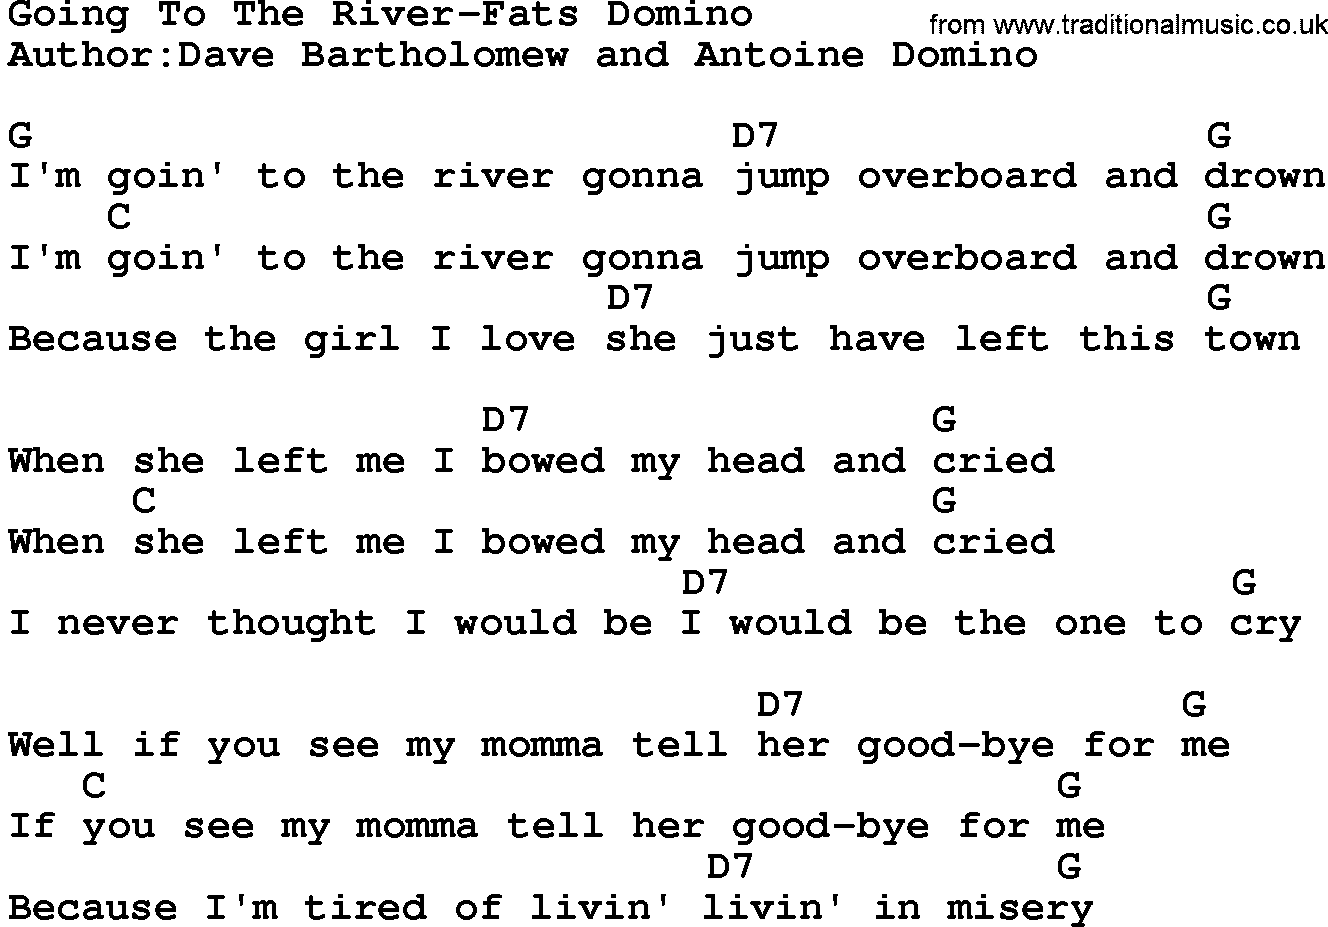 Country music song: Going To The River-Fats Domino lyrics and chords